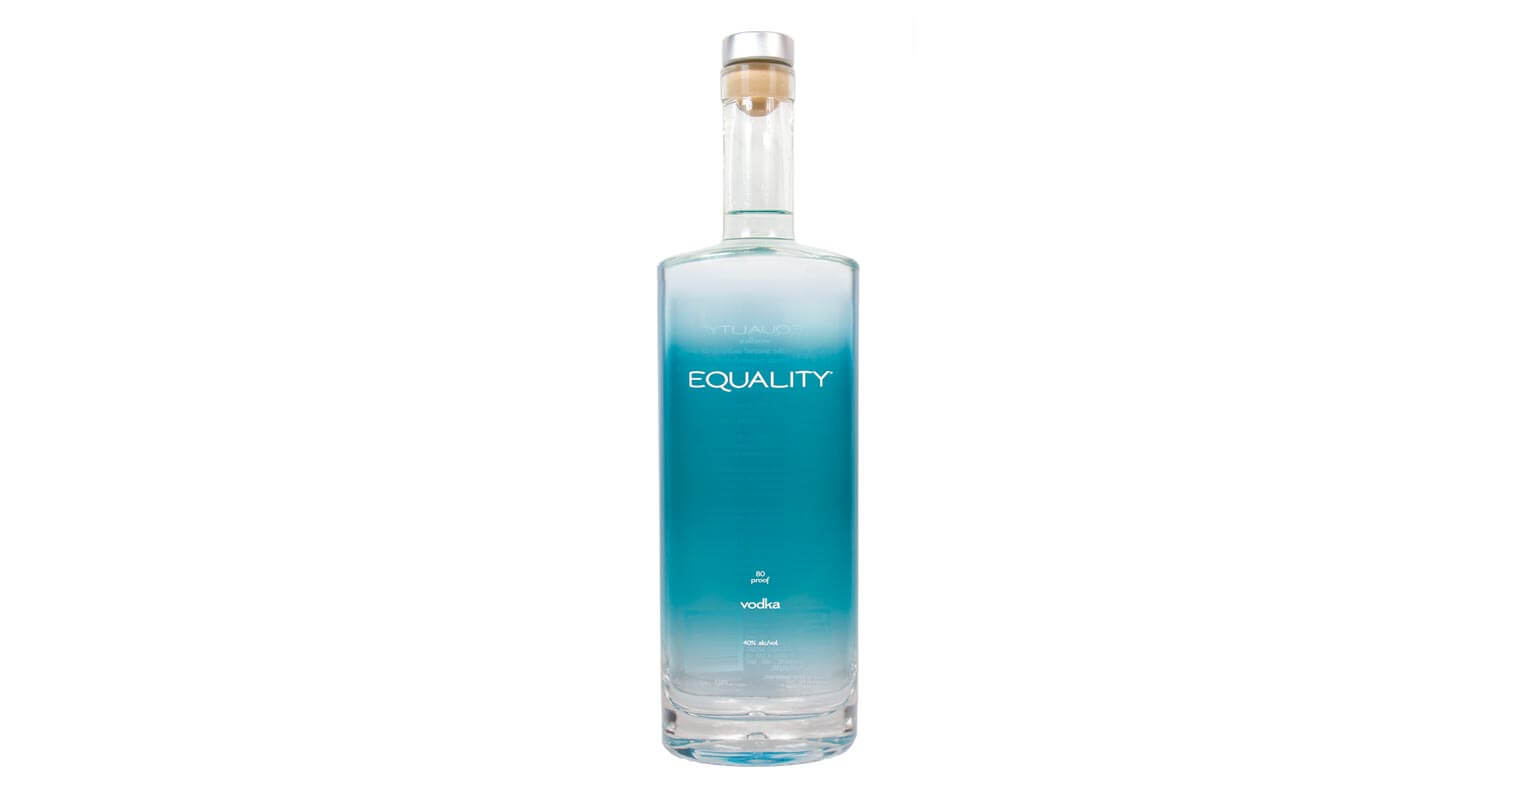 Equality Vodka, bottle on white, featured image